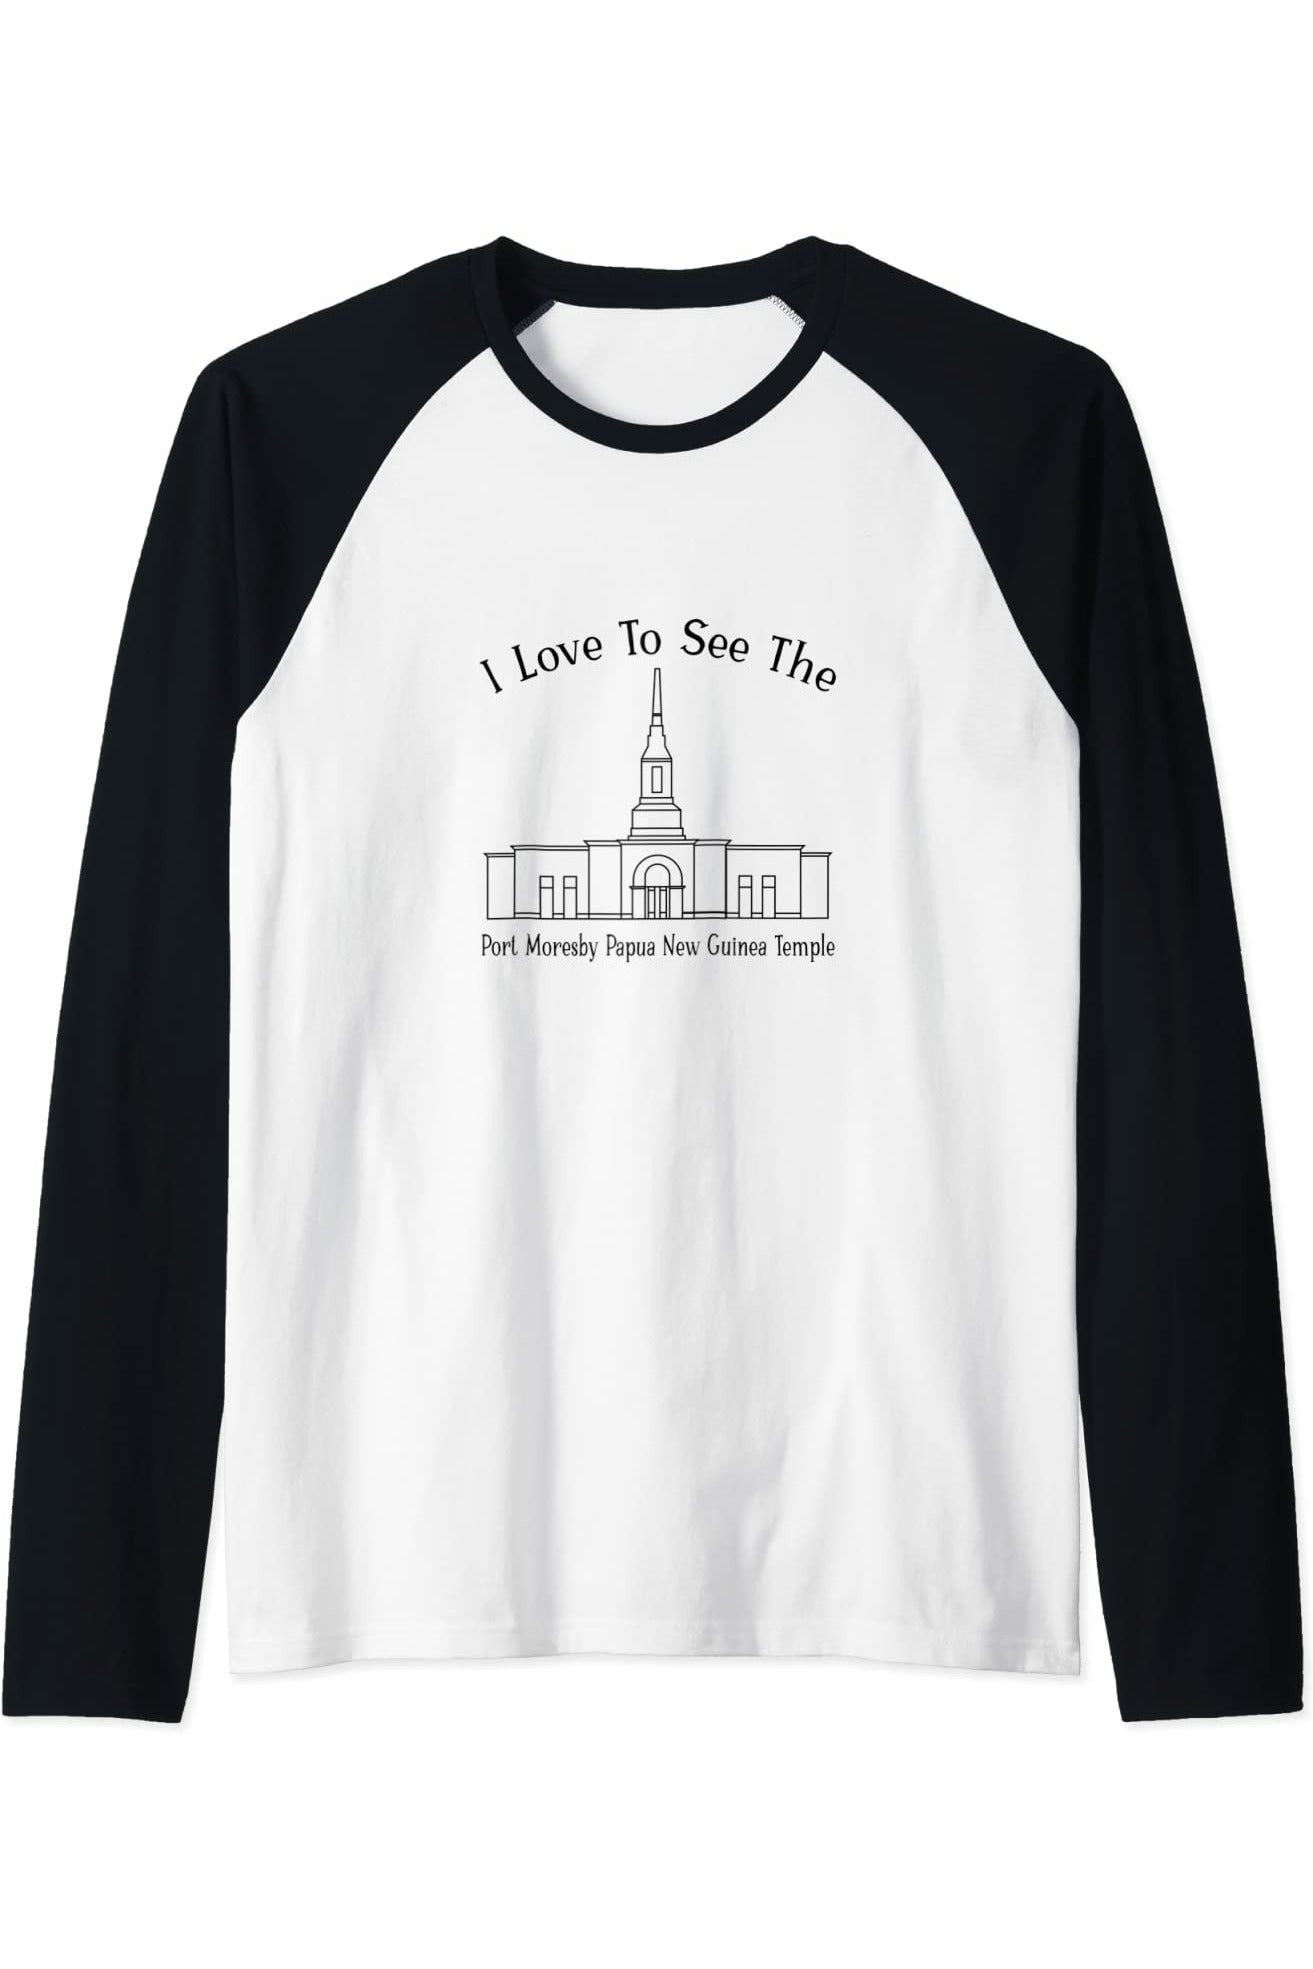 Port Moresby Papua New Guinea Temple Raglan - Happy Style (English) US